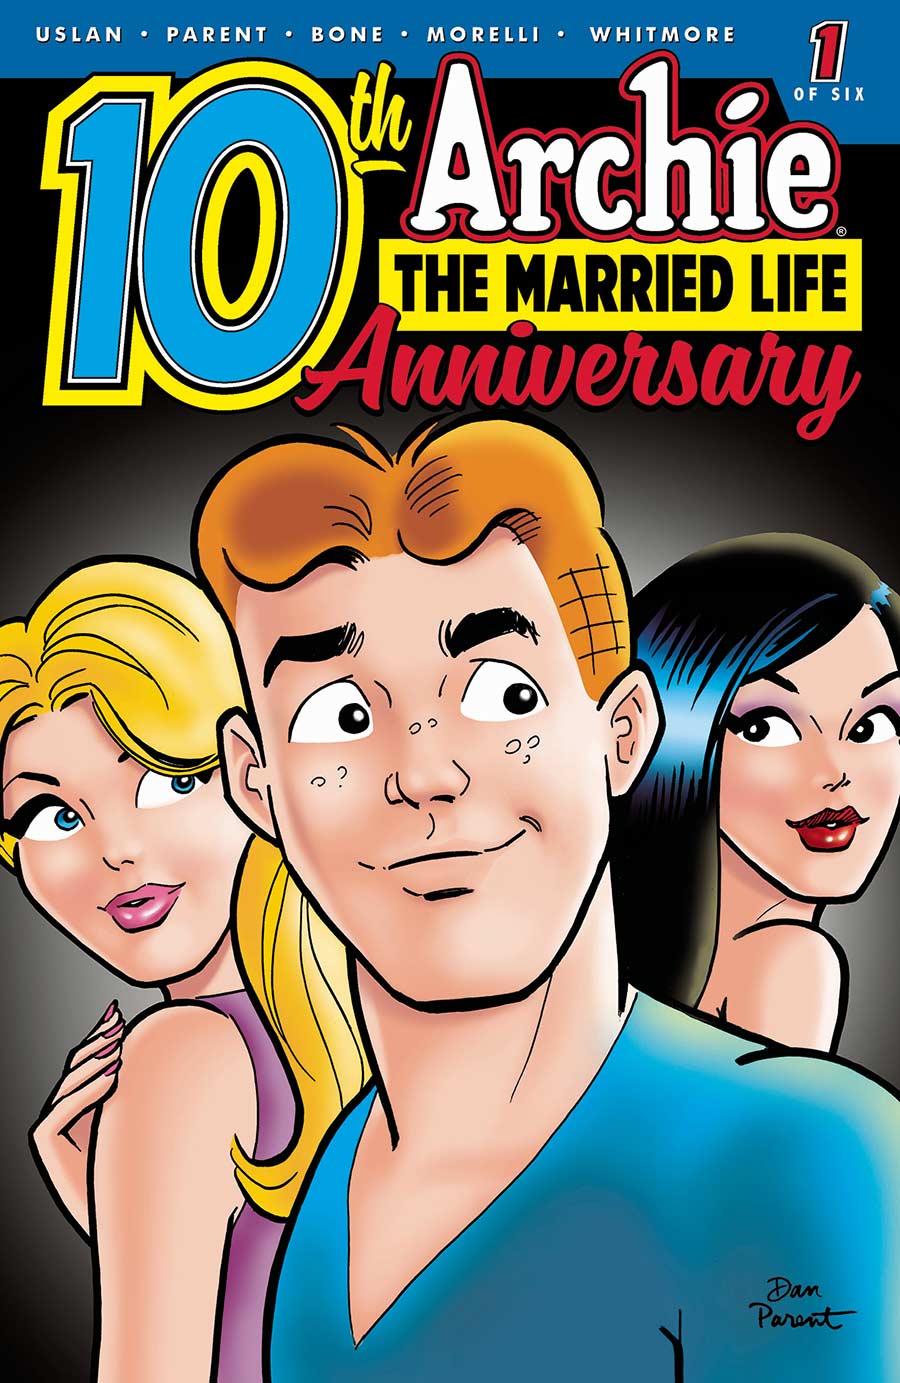 Archie: The Married Life 10th Anniversary